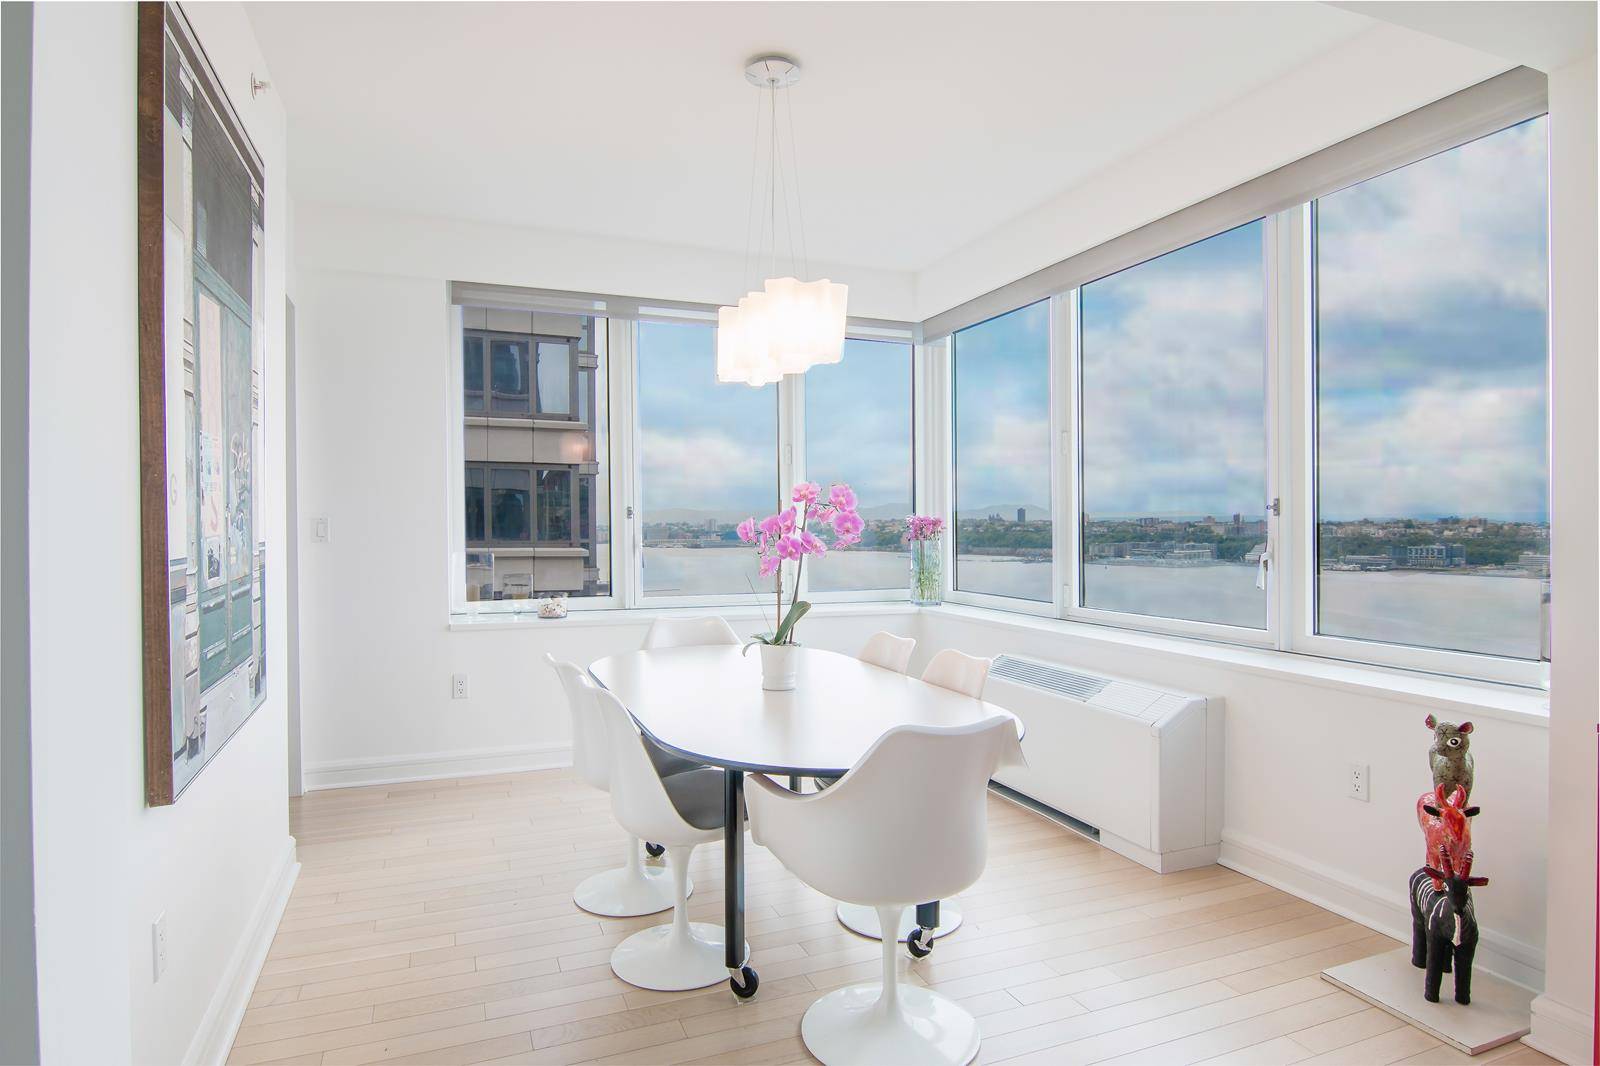 This is a spacious three bedroom three bathroom Lincoln Square condo with Hudson River and city views.